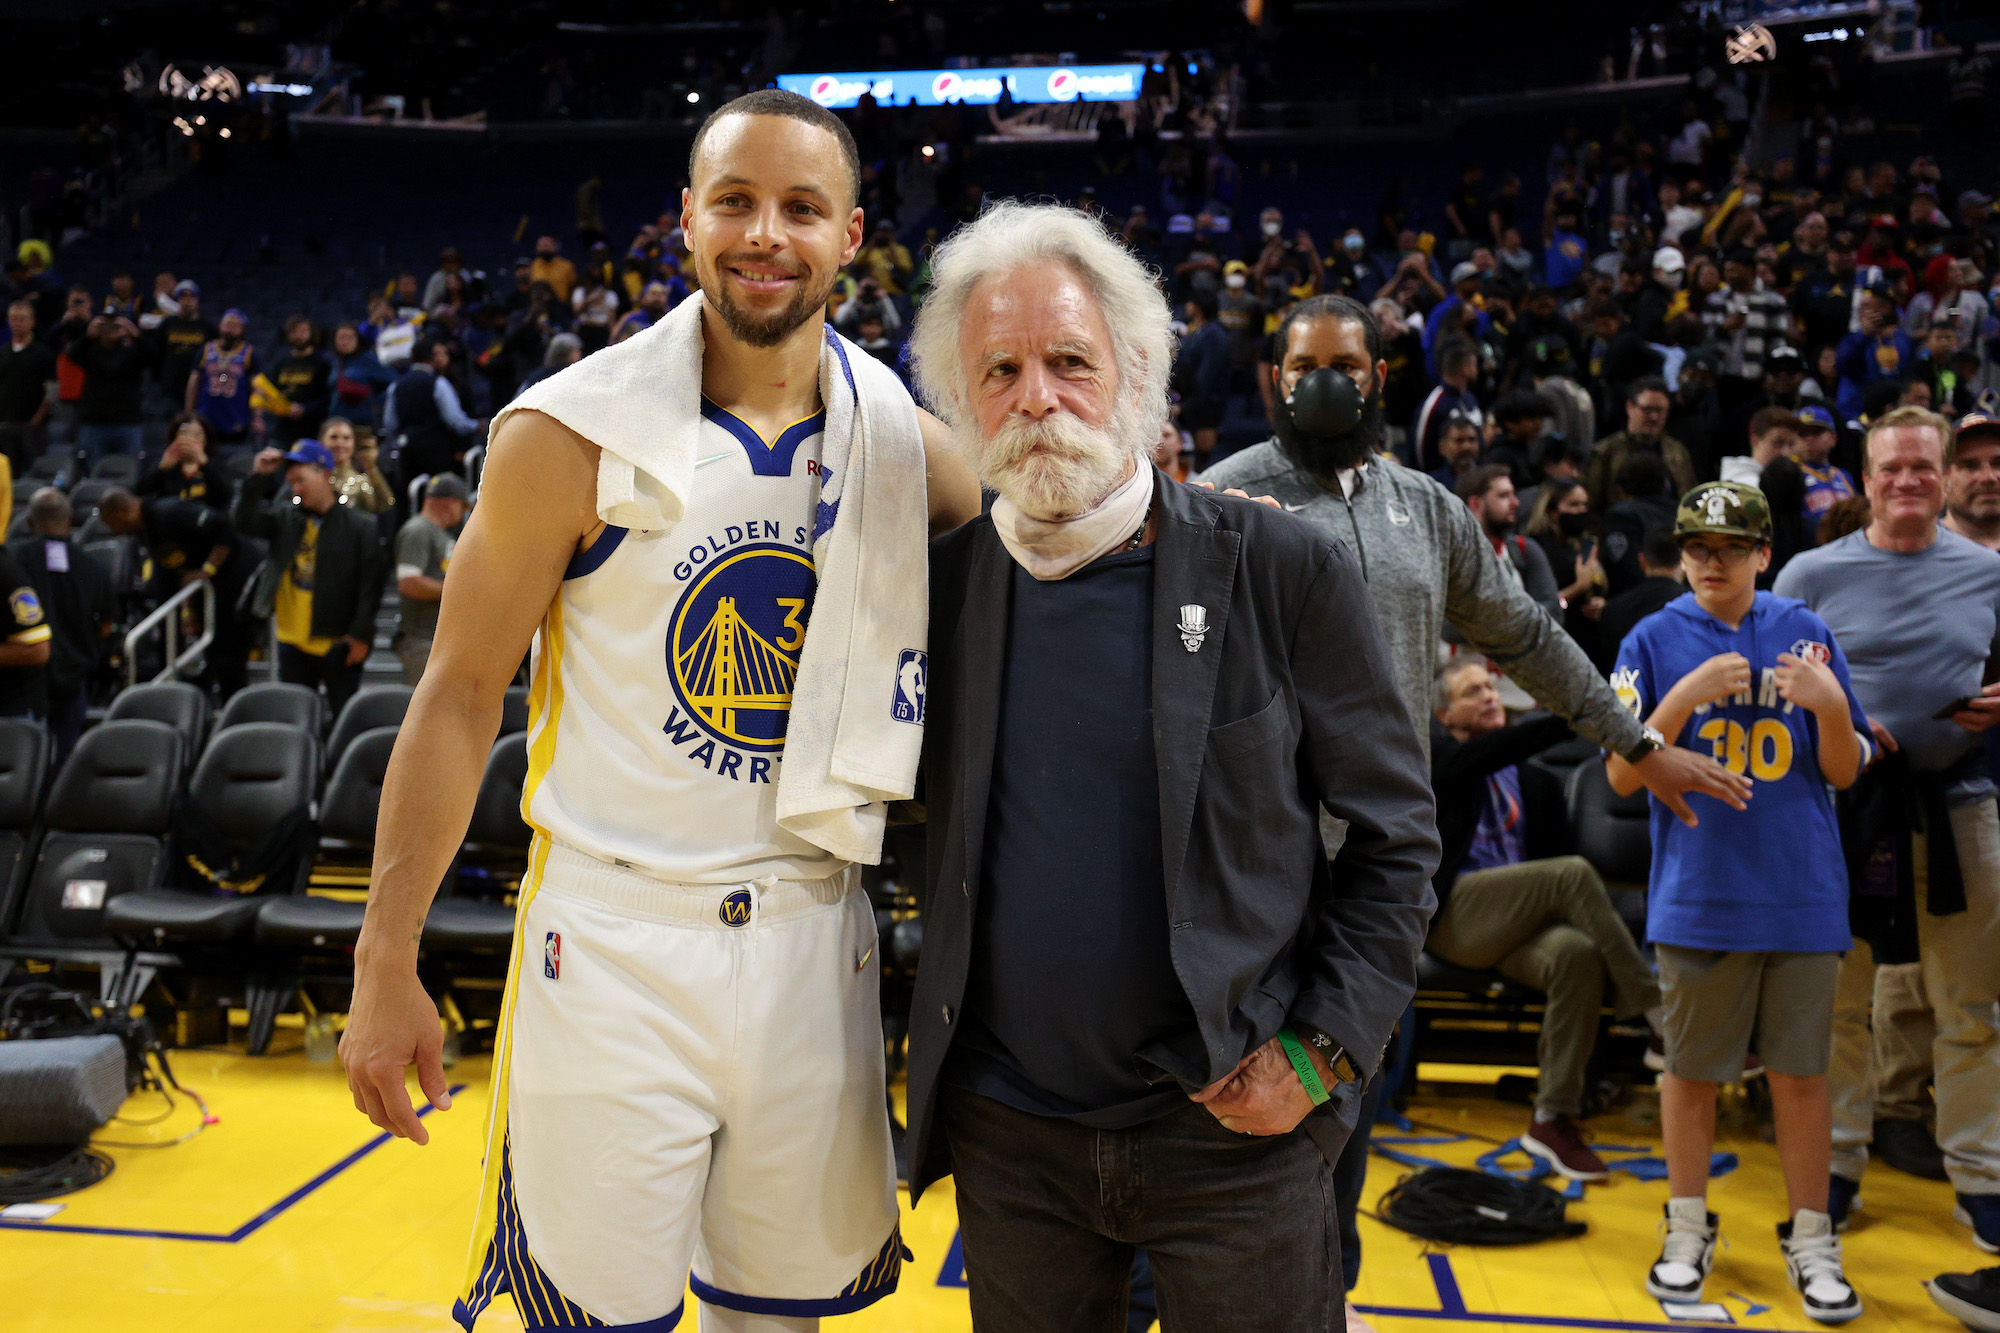 SAN FRANCISCO, CALIFORNIA - APRIL 18: Stephen Curry #30 of the Golden State Warriors poses for a picture with Grateful Dead musician Bob Weir following Game Two of the Western Conference First Round NBA Playoffs against the Denver Nuggets at Chase Center on April 18, 2022 in San Francisco, California. NOTE TO USER: User expressly acknowledges and agrees that, by downloading and/or using this photograph, User is consenting to the terms and conditions of the Getty Images License Agreement. (Photo by Ezra Shaw/Getty Images)